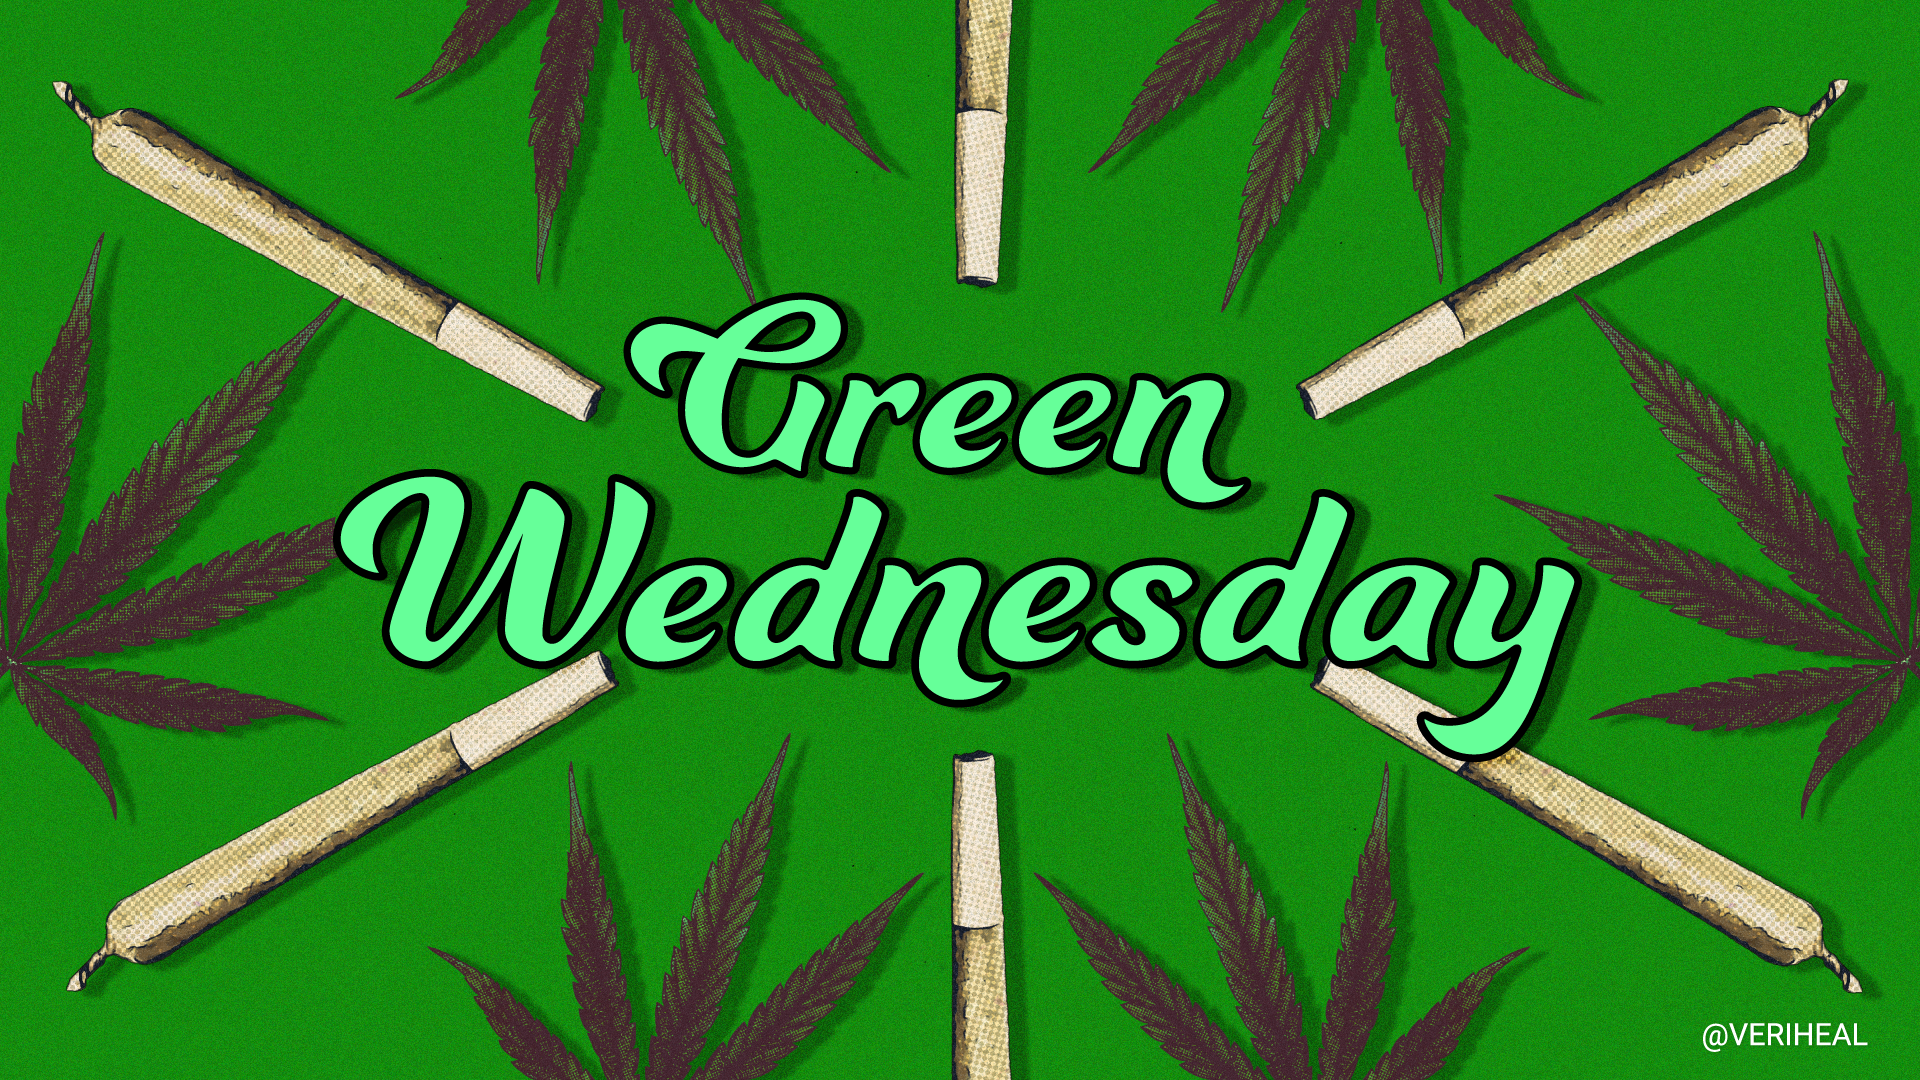 The Rise of Green Wednesday Shows Increasing Acceptance of Cannabis